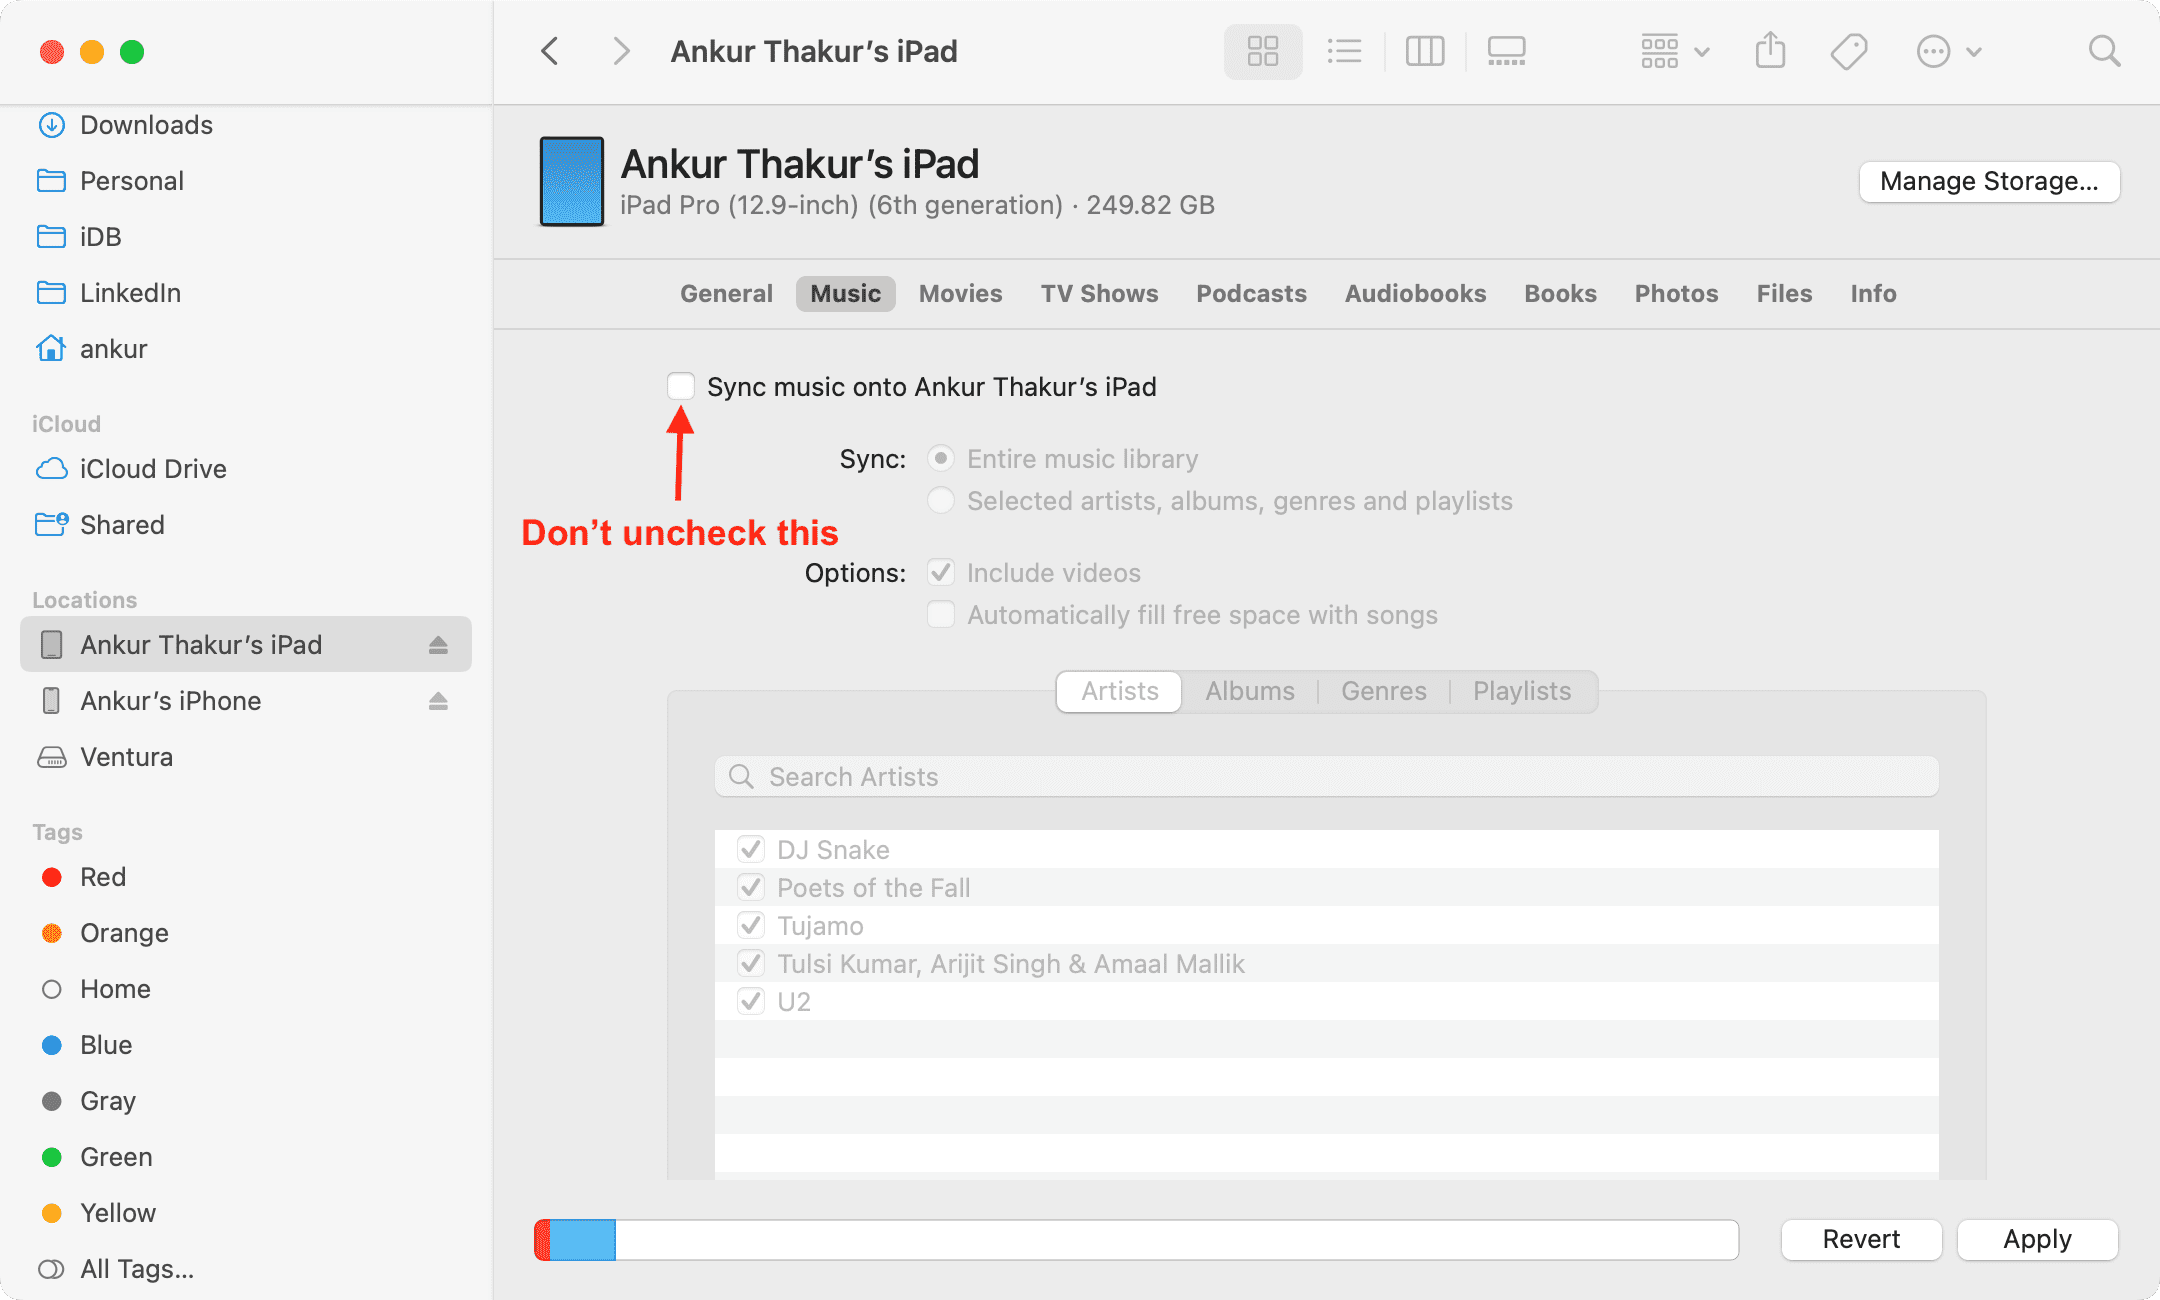 Sync music onto iPad unchecked in Finder on Mac